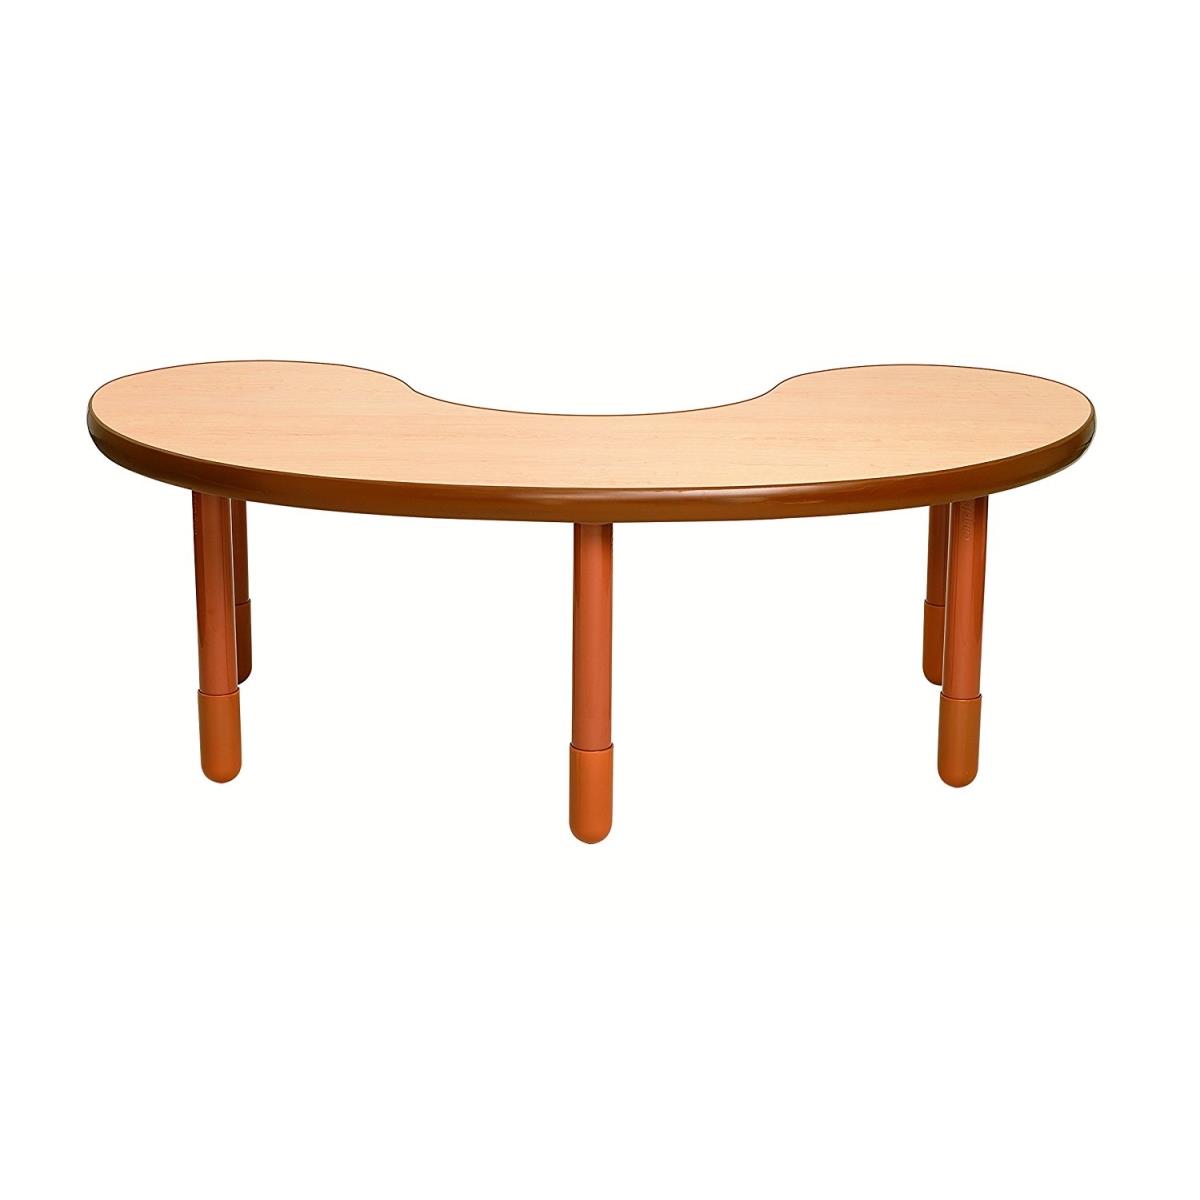 Ab739knw12 38 X 65 In. Teacher & Kidney Baseline Table With 12 In. Legs, Natural Wood